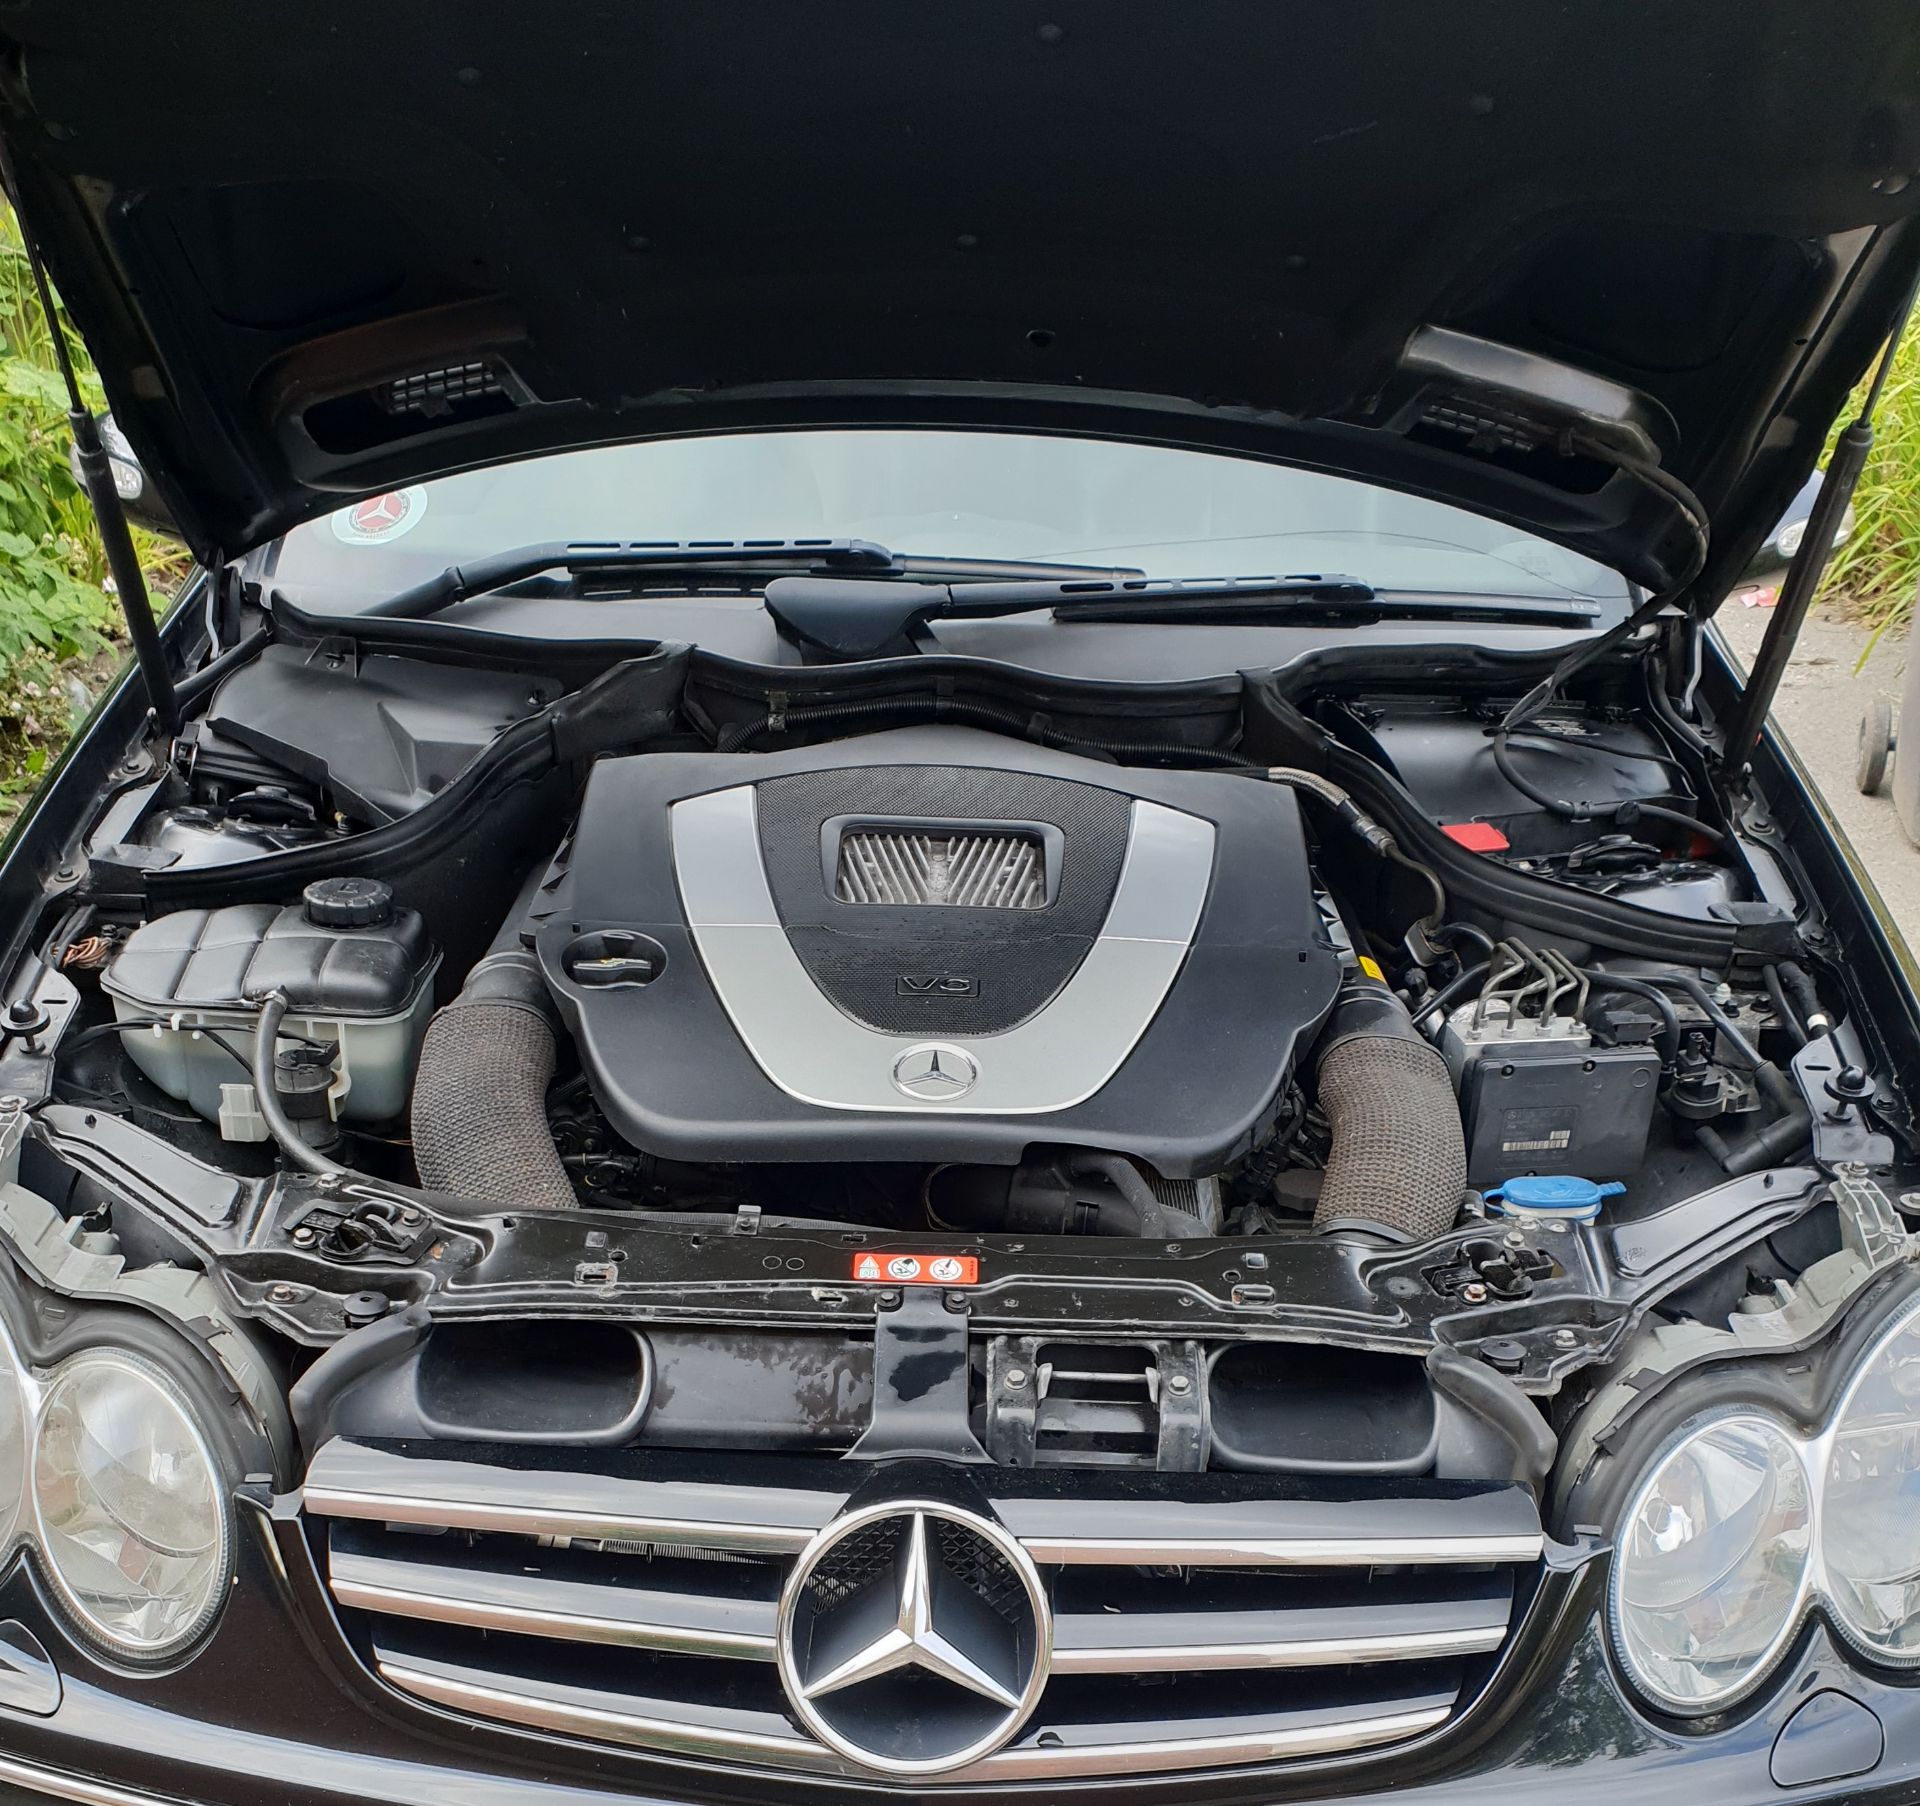 2006 Mercedes CLK280 Sport with AMG kit. Fully loaded + Sat-Nav in Excellent condition - Bild 15 aus 16